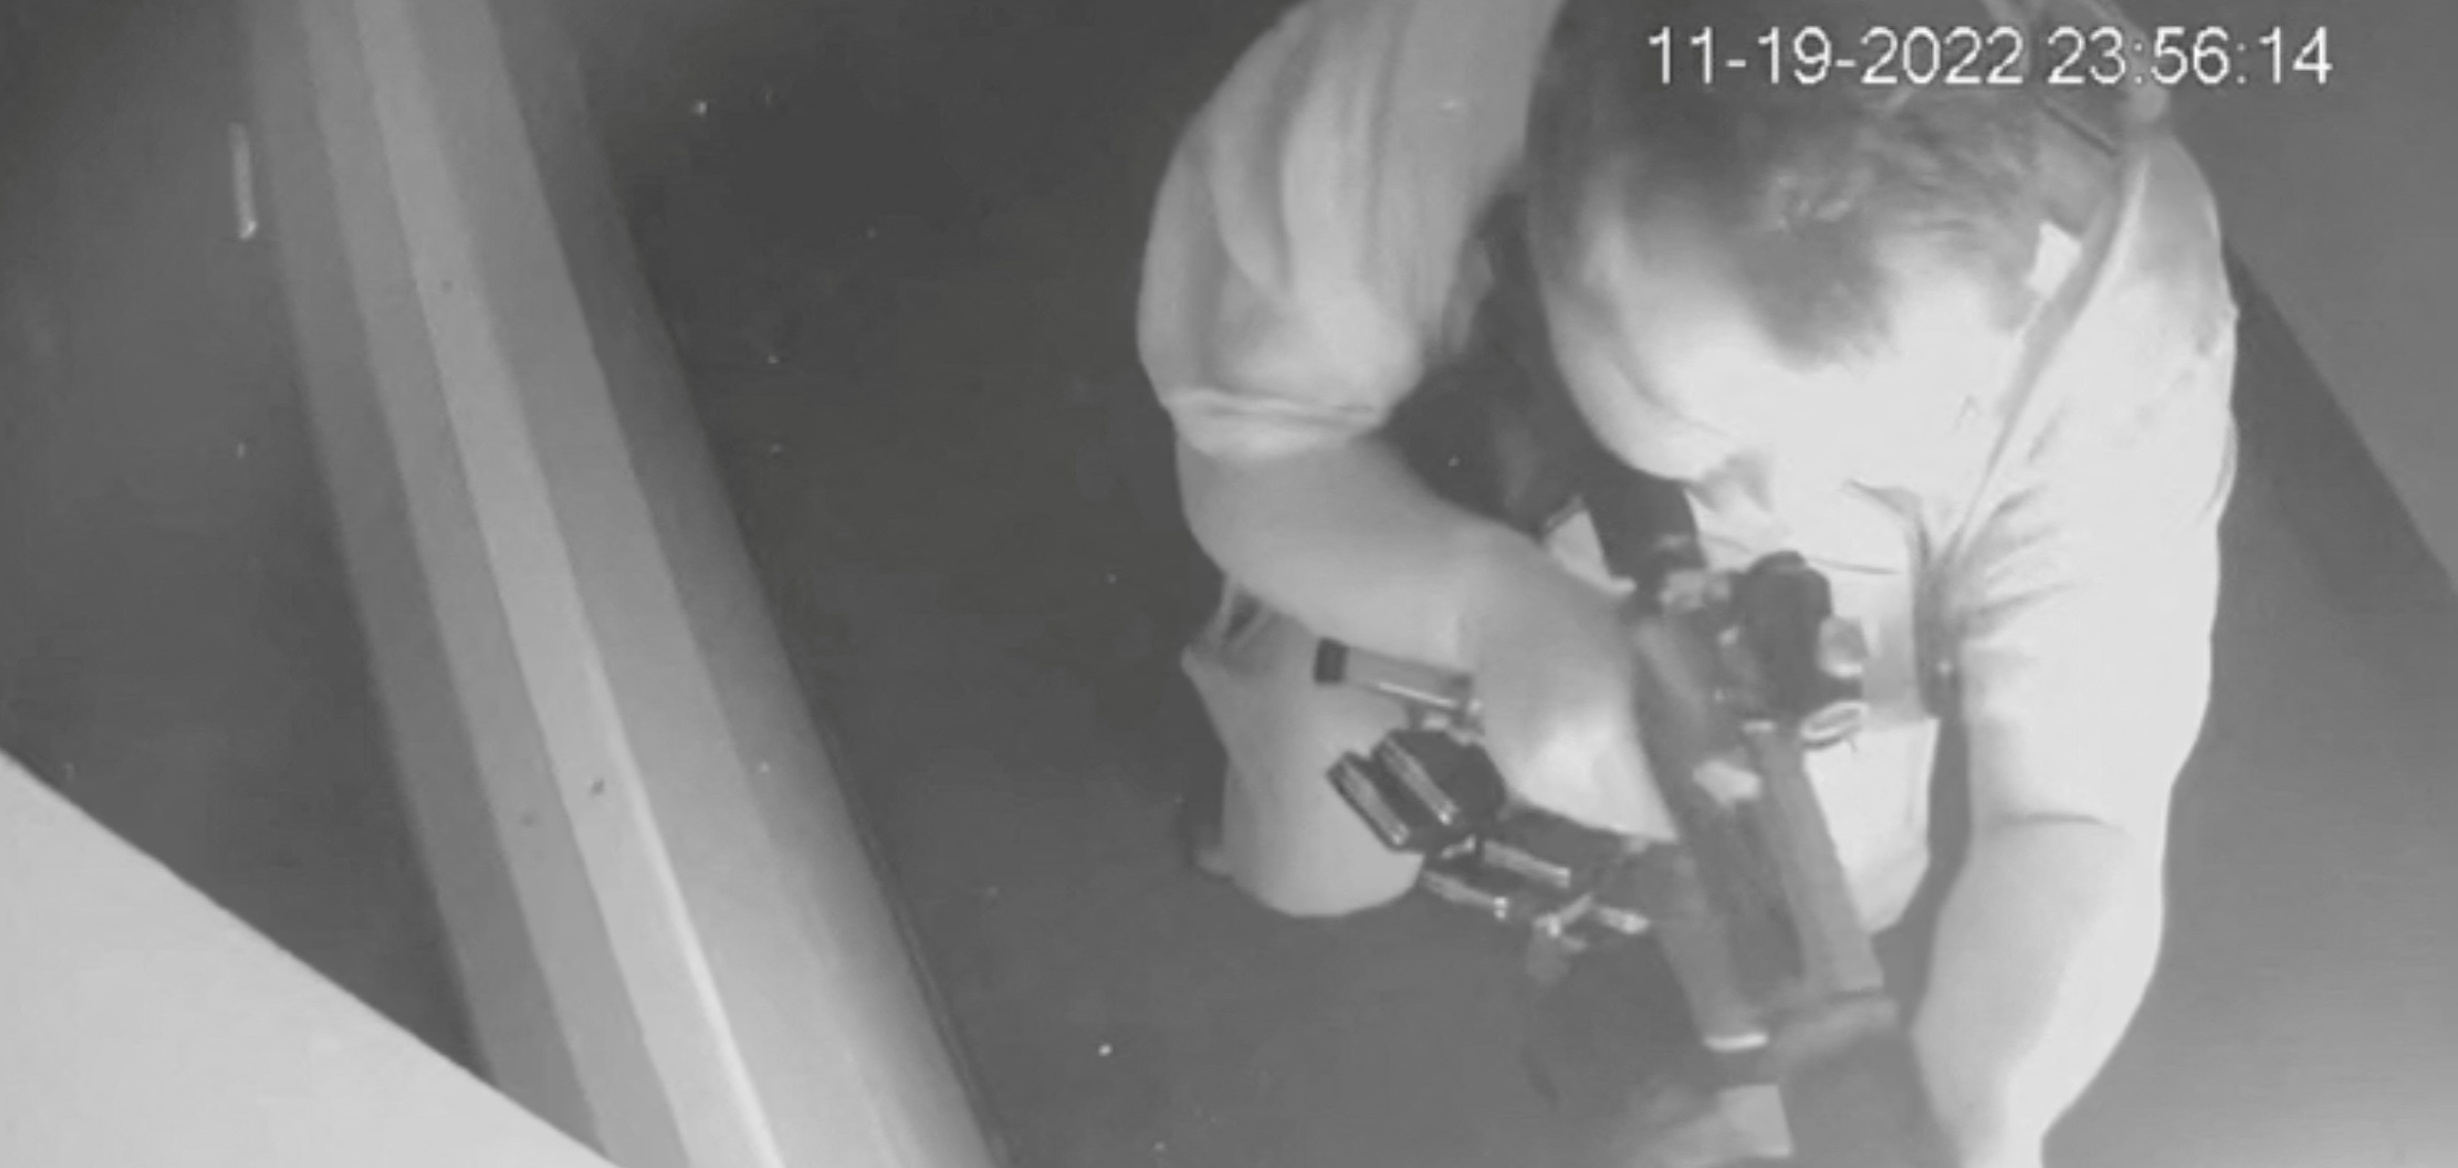 A black-and-white overhead view of the suspect Anderson Lee Aldrich firing a weapon into the LGBTQ nightclub Club